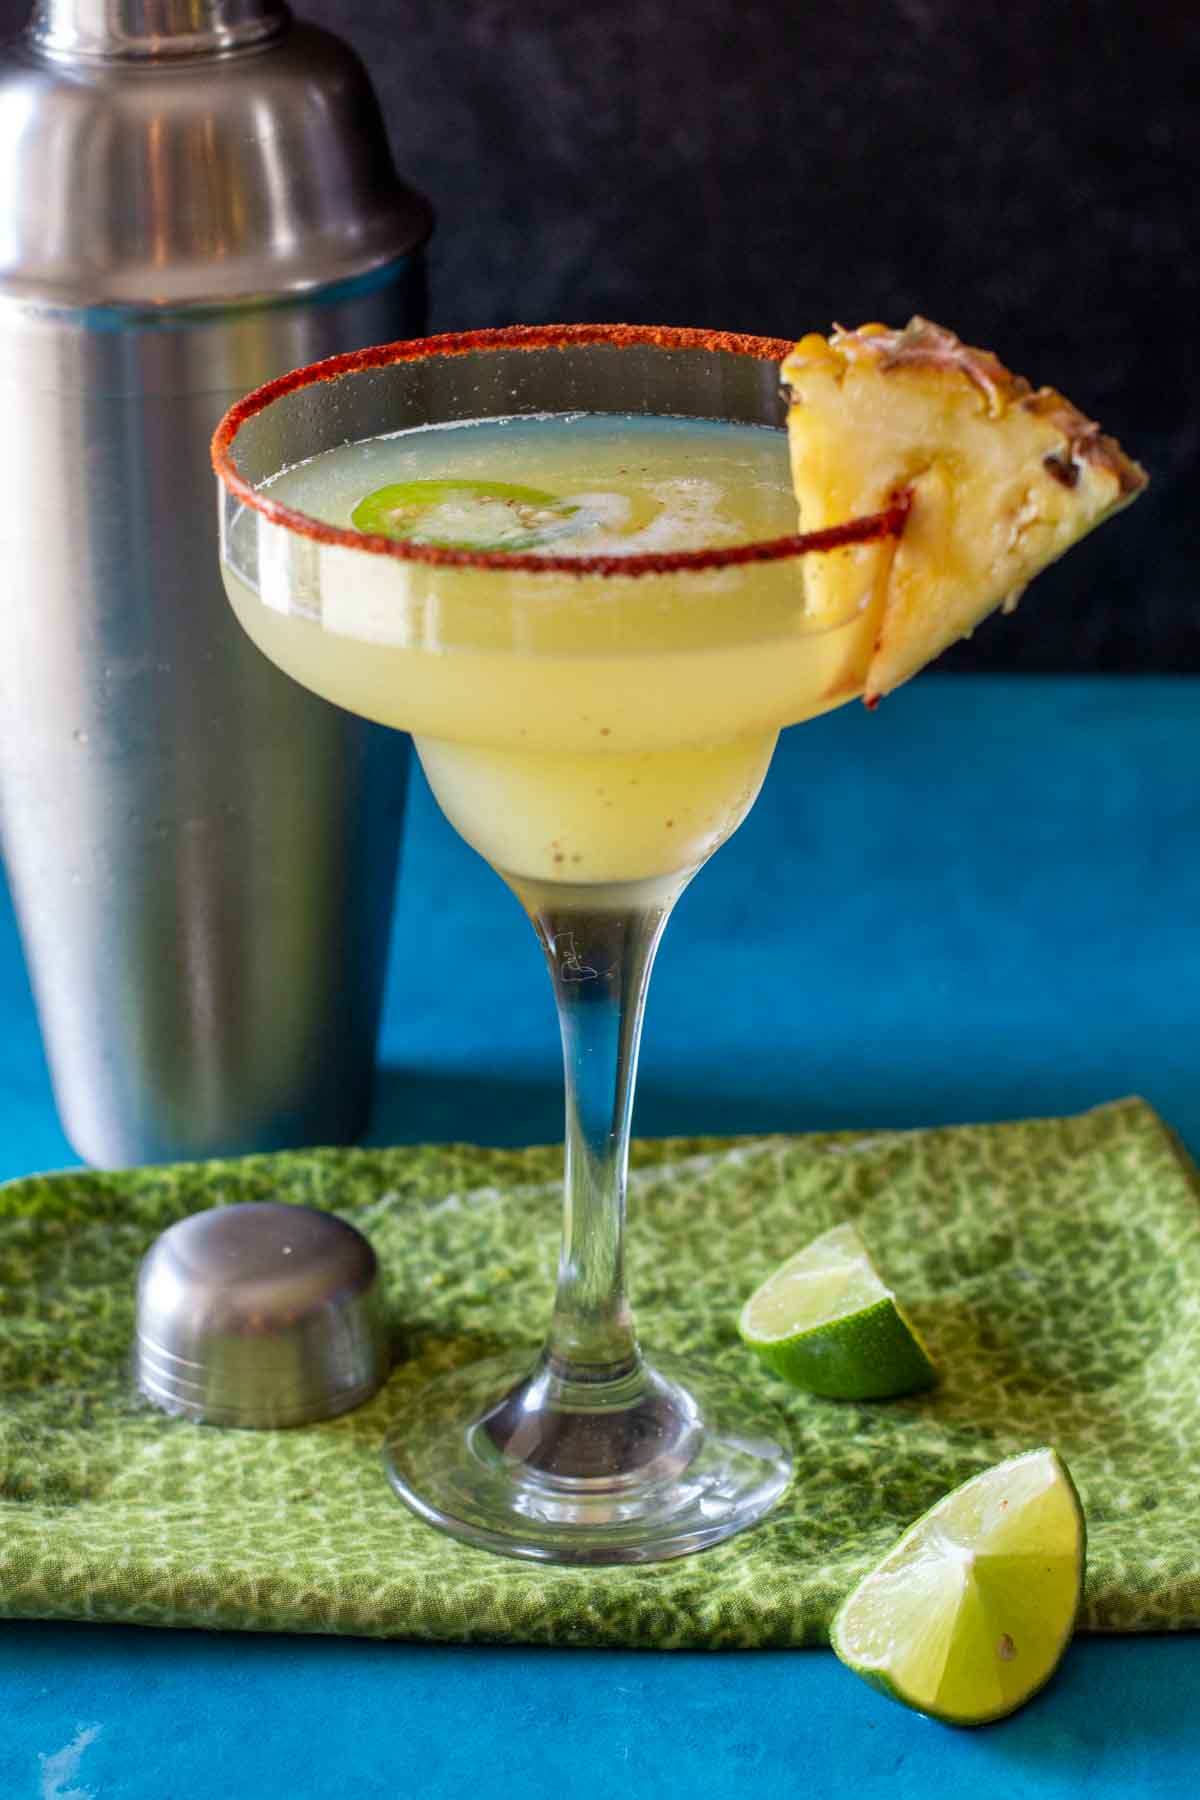 Spicy pineapple margarita garnished with a wedge of pineapple and rimmed with Tajin seasoning.